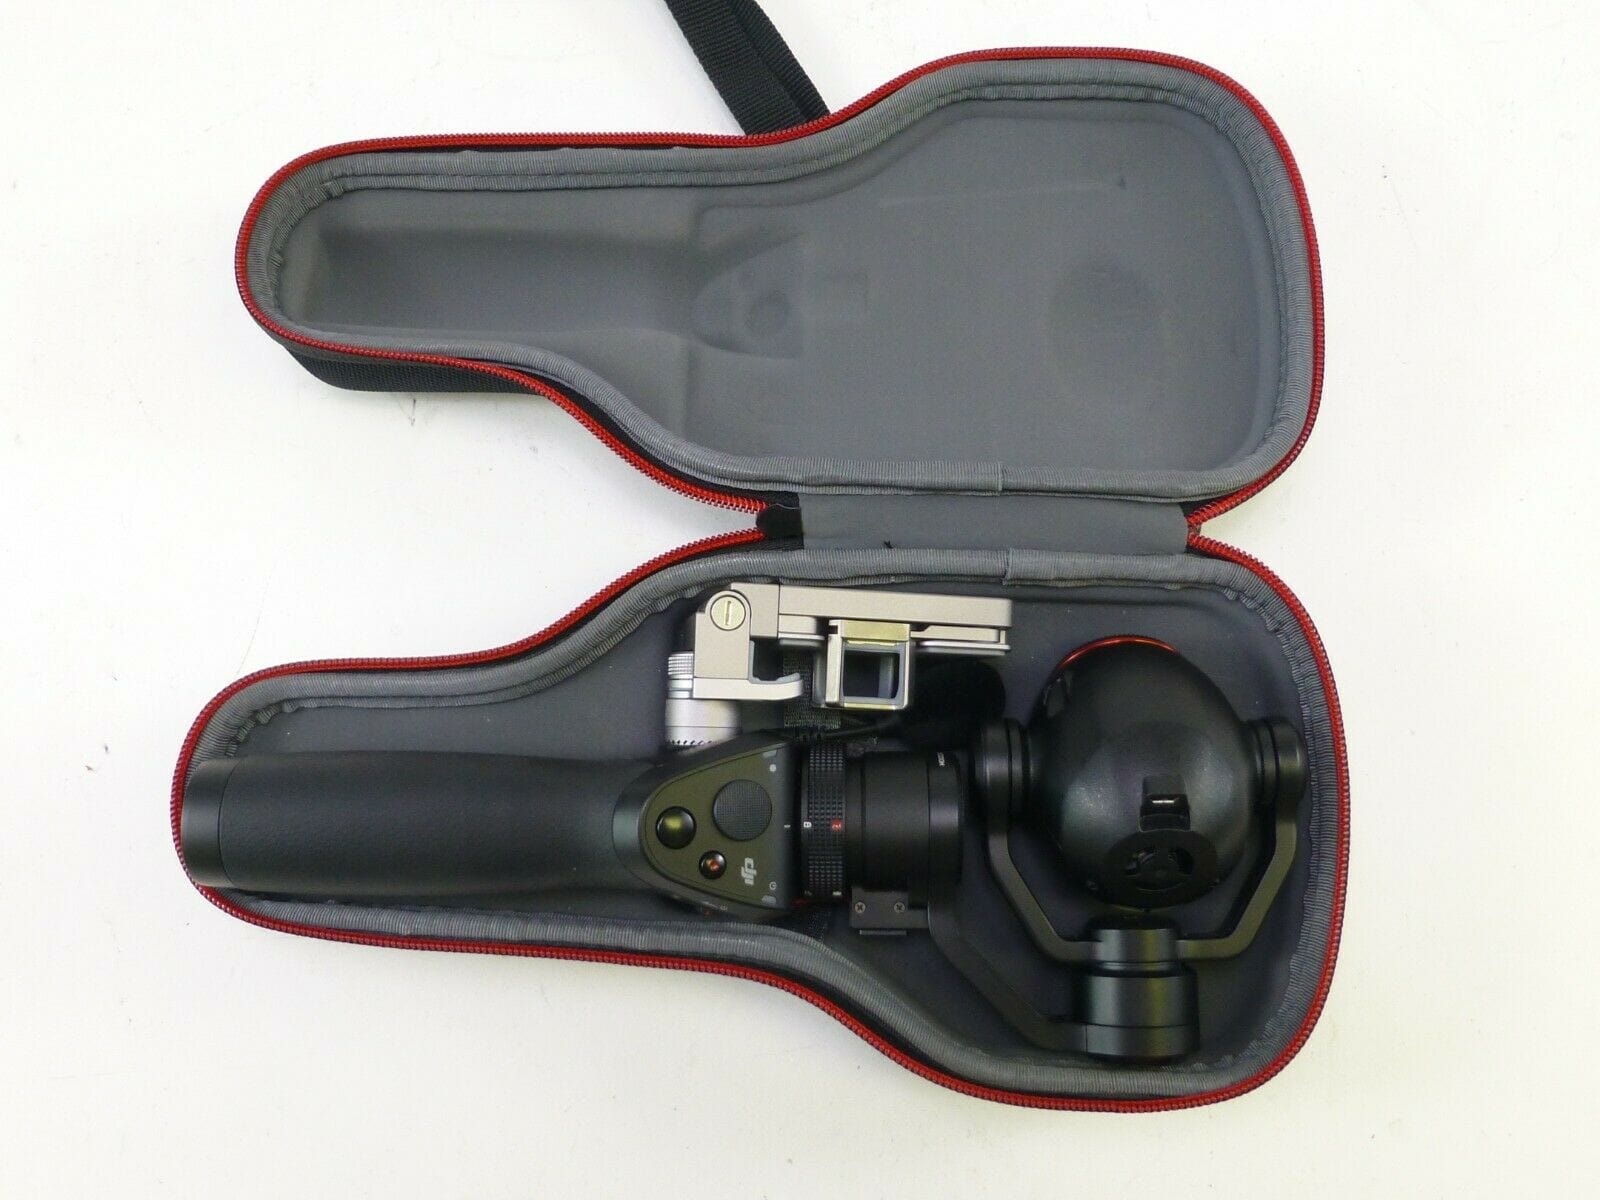 DJI Osmo+ 4K with Case, Battery, Charger, and Microphone. Being